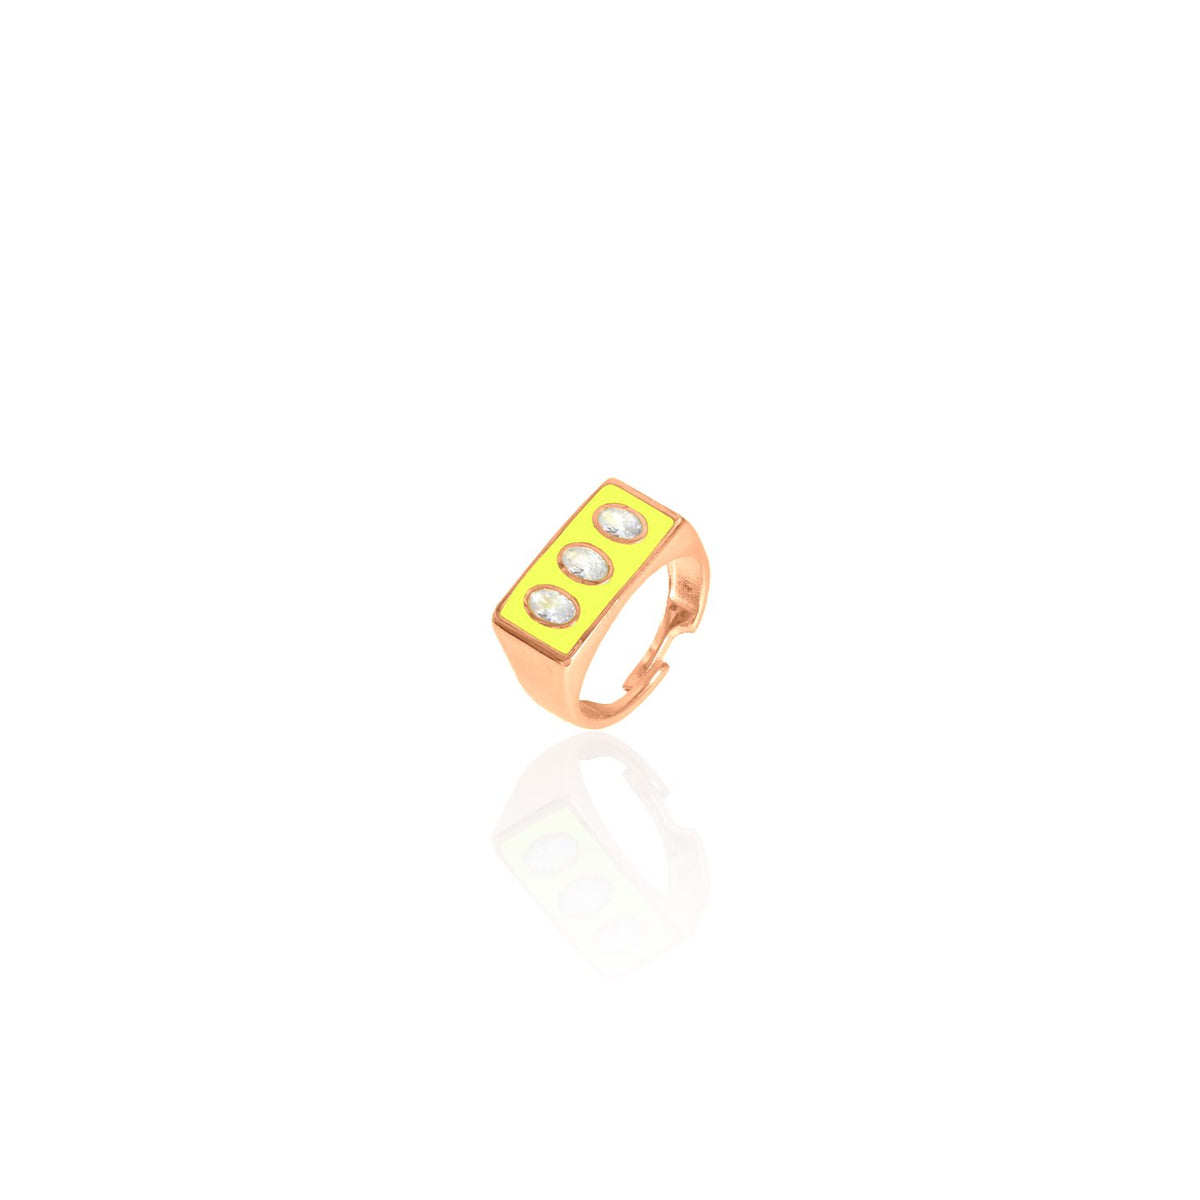 Colored Enamel 3 Oval Crystals Rectangular Ring